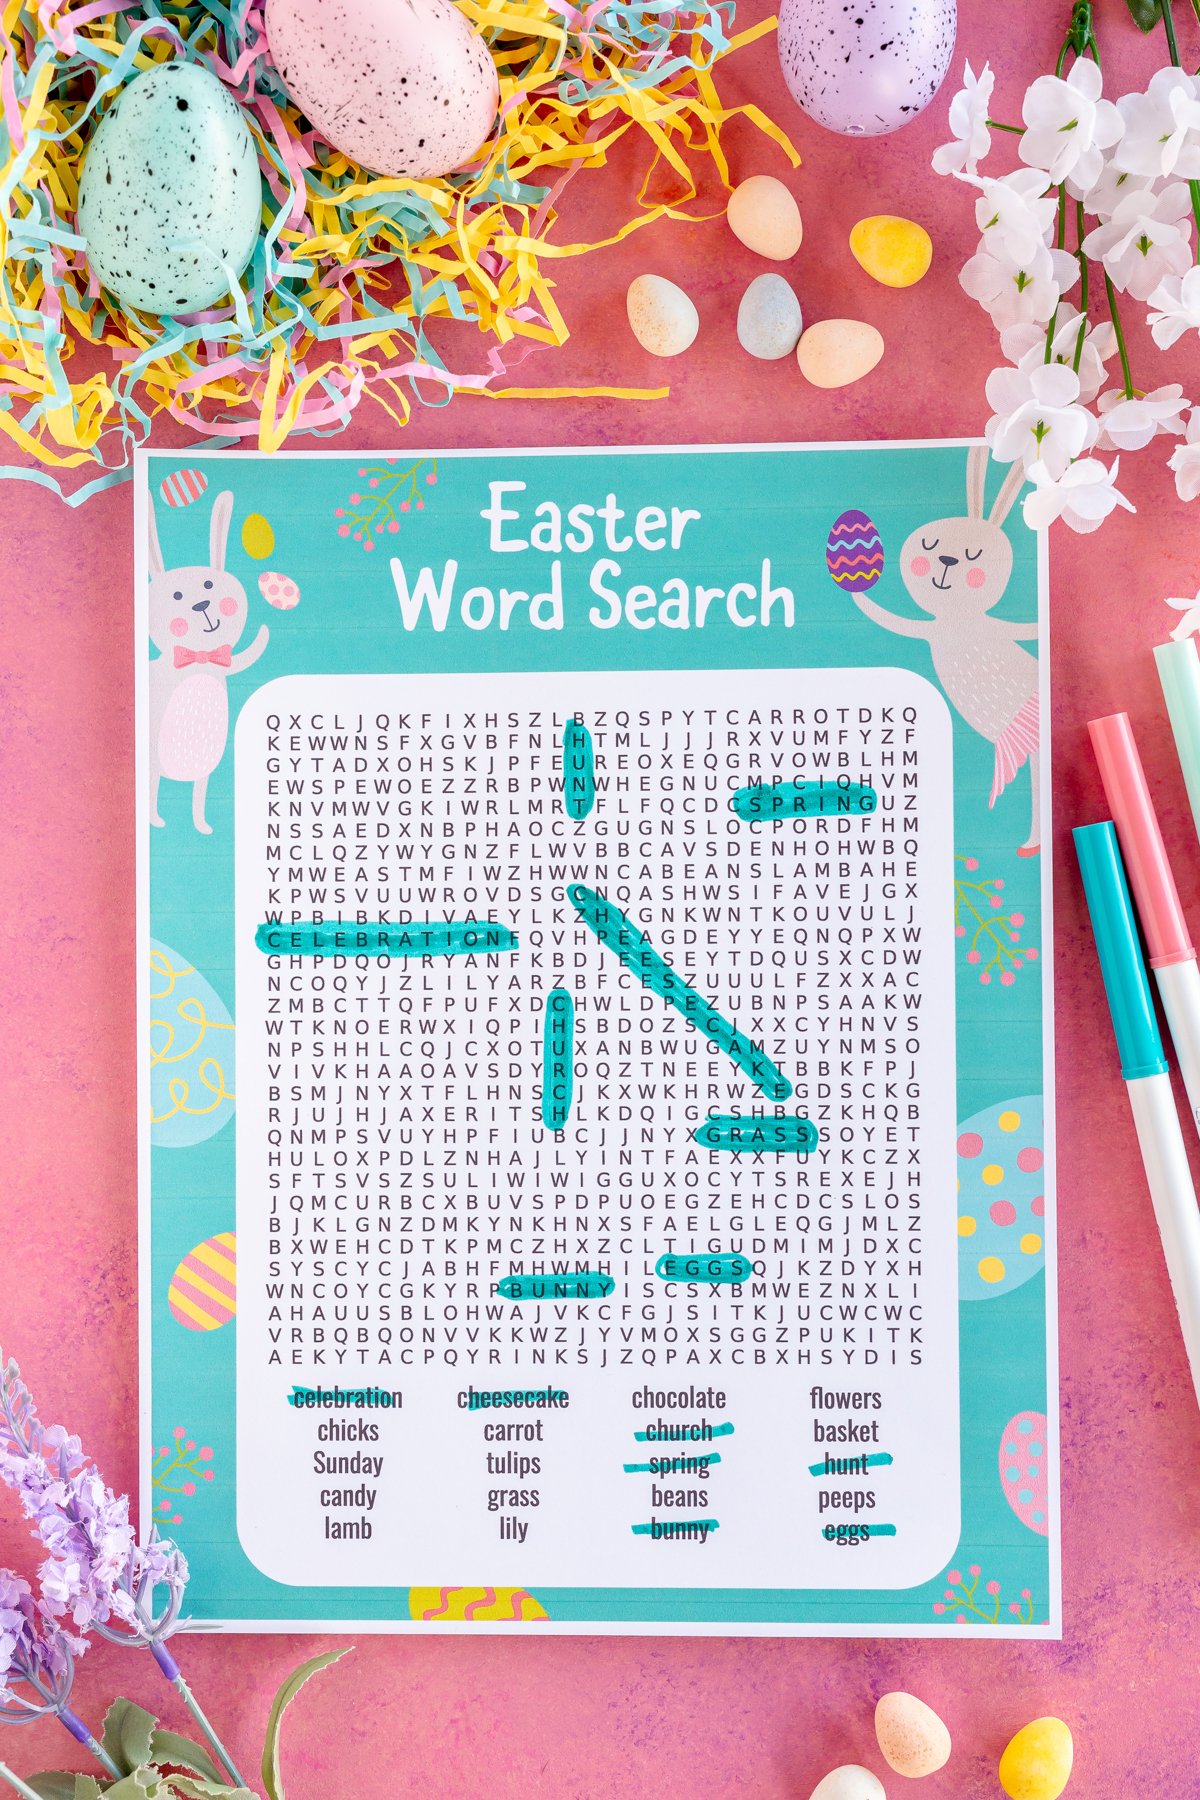 Easter word search with words highlighted